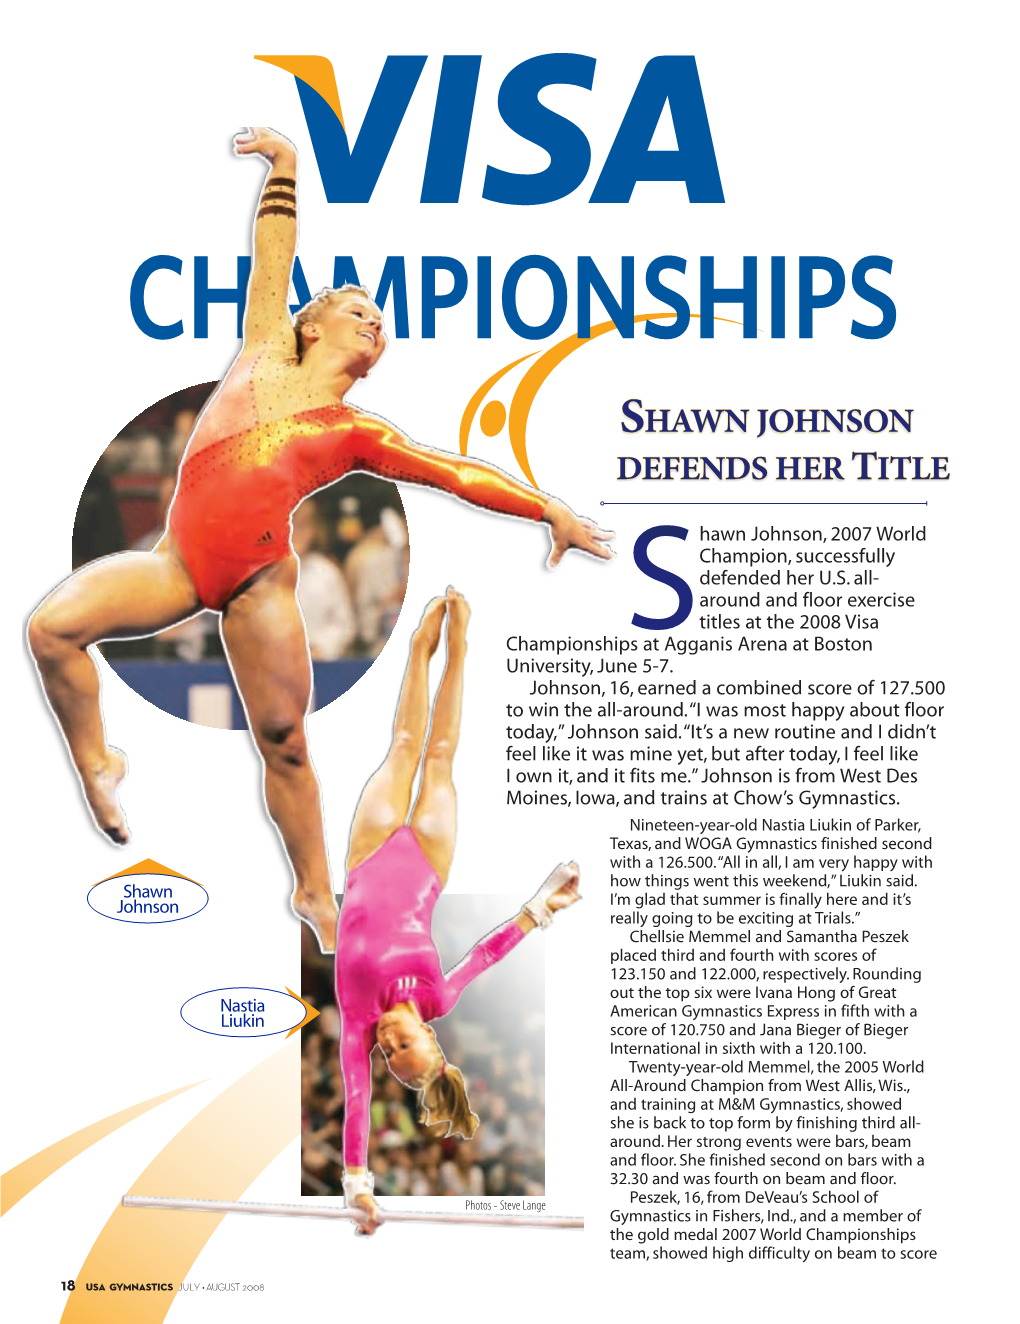 Shawn Johnson Defends Her Title